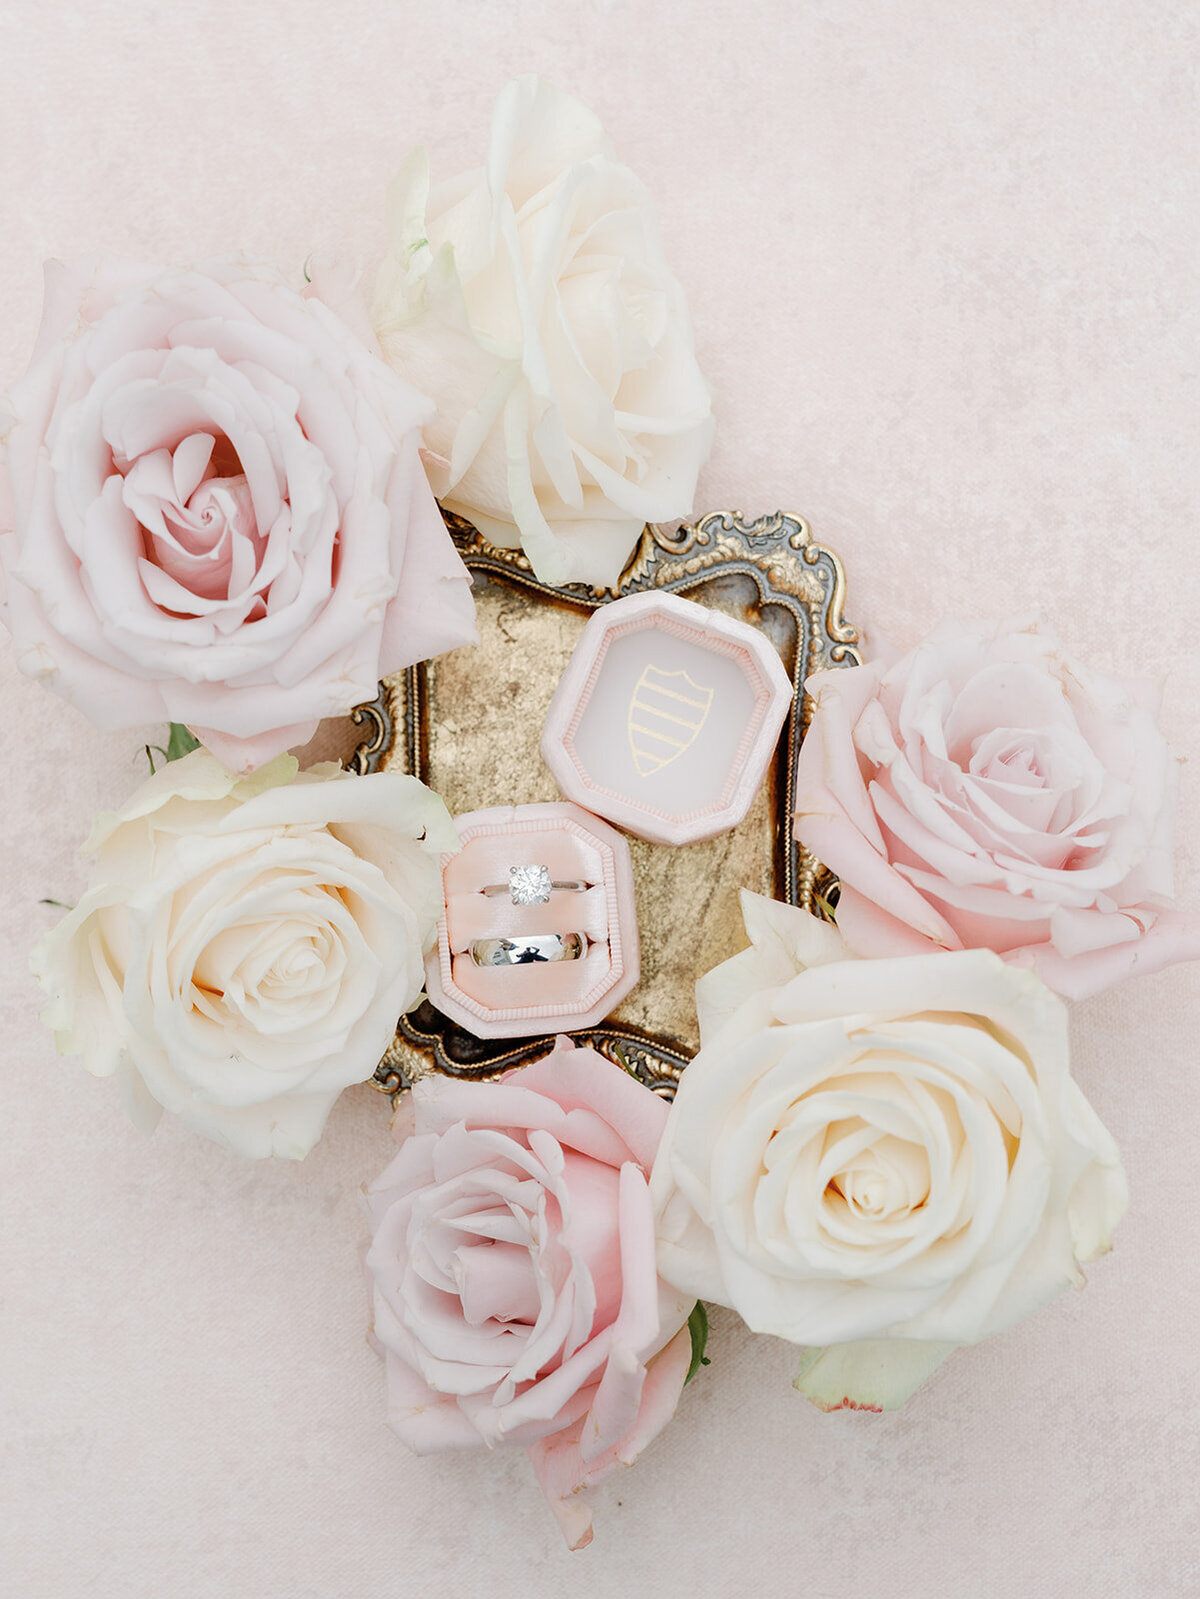 Wedding bands on a golden tray surrounded by white and pink roses.